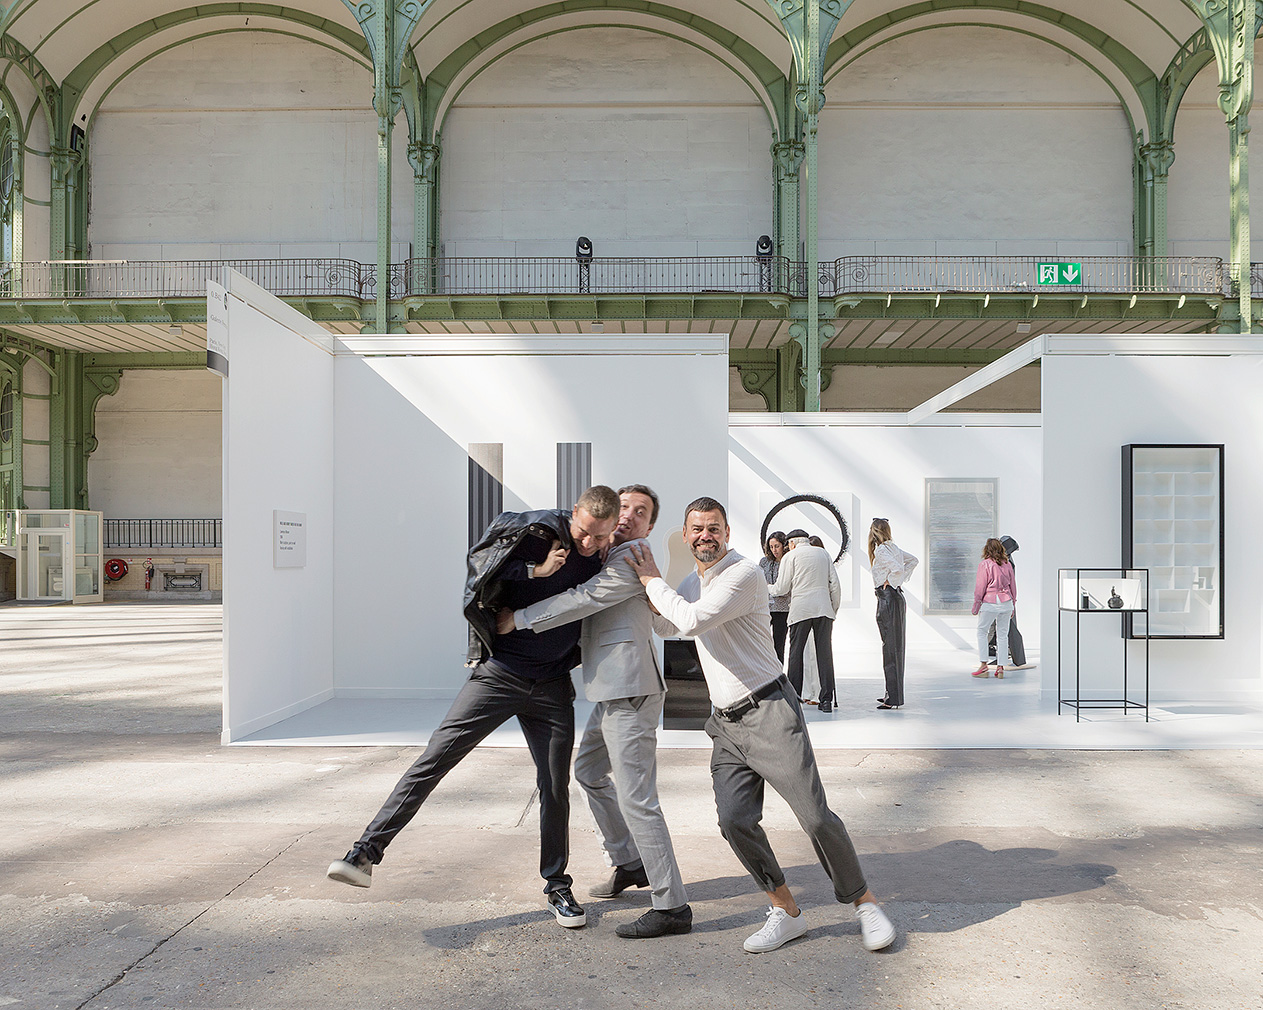 Elmgreen & Dragset with Emmanuel Perrotin in front of of the one-day installation "Elmgreen & Dragset present Galerie Perrotin at the Grand Palais"